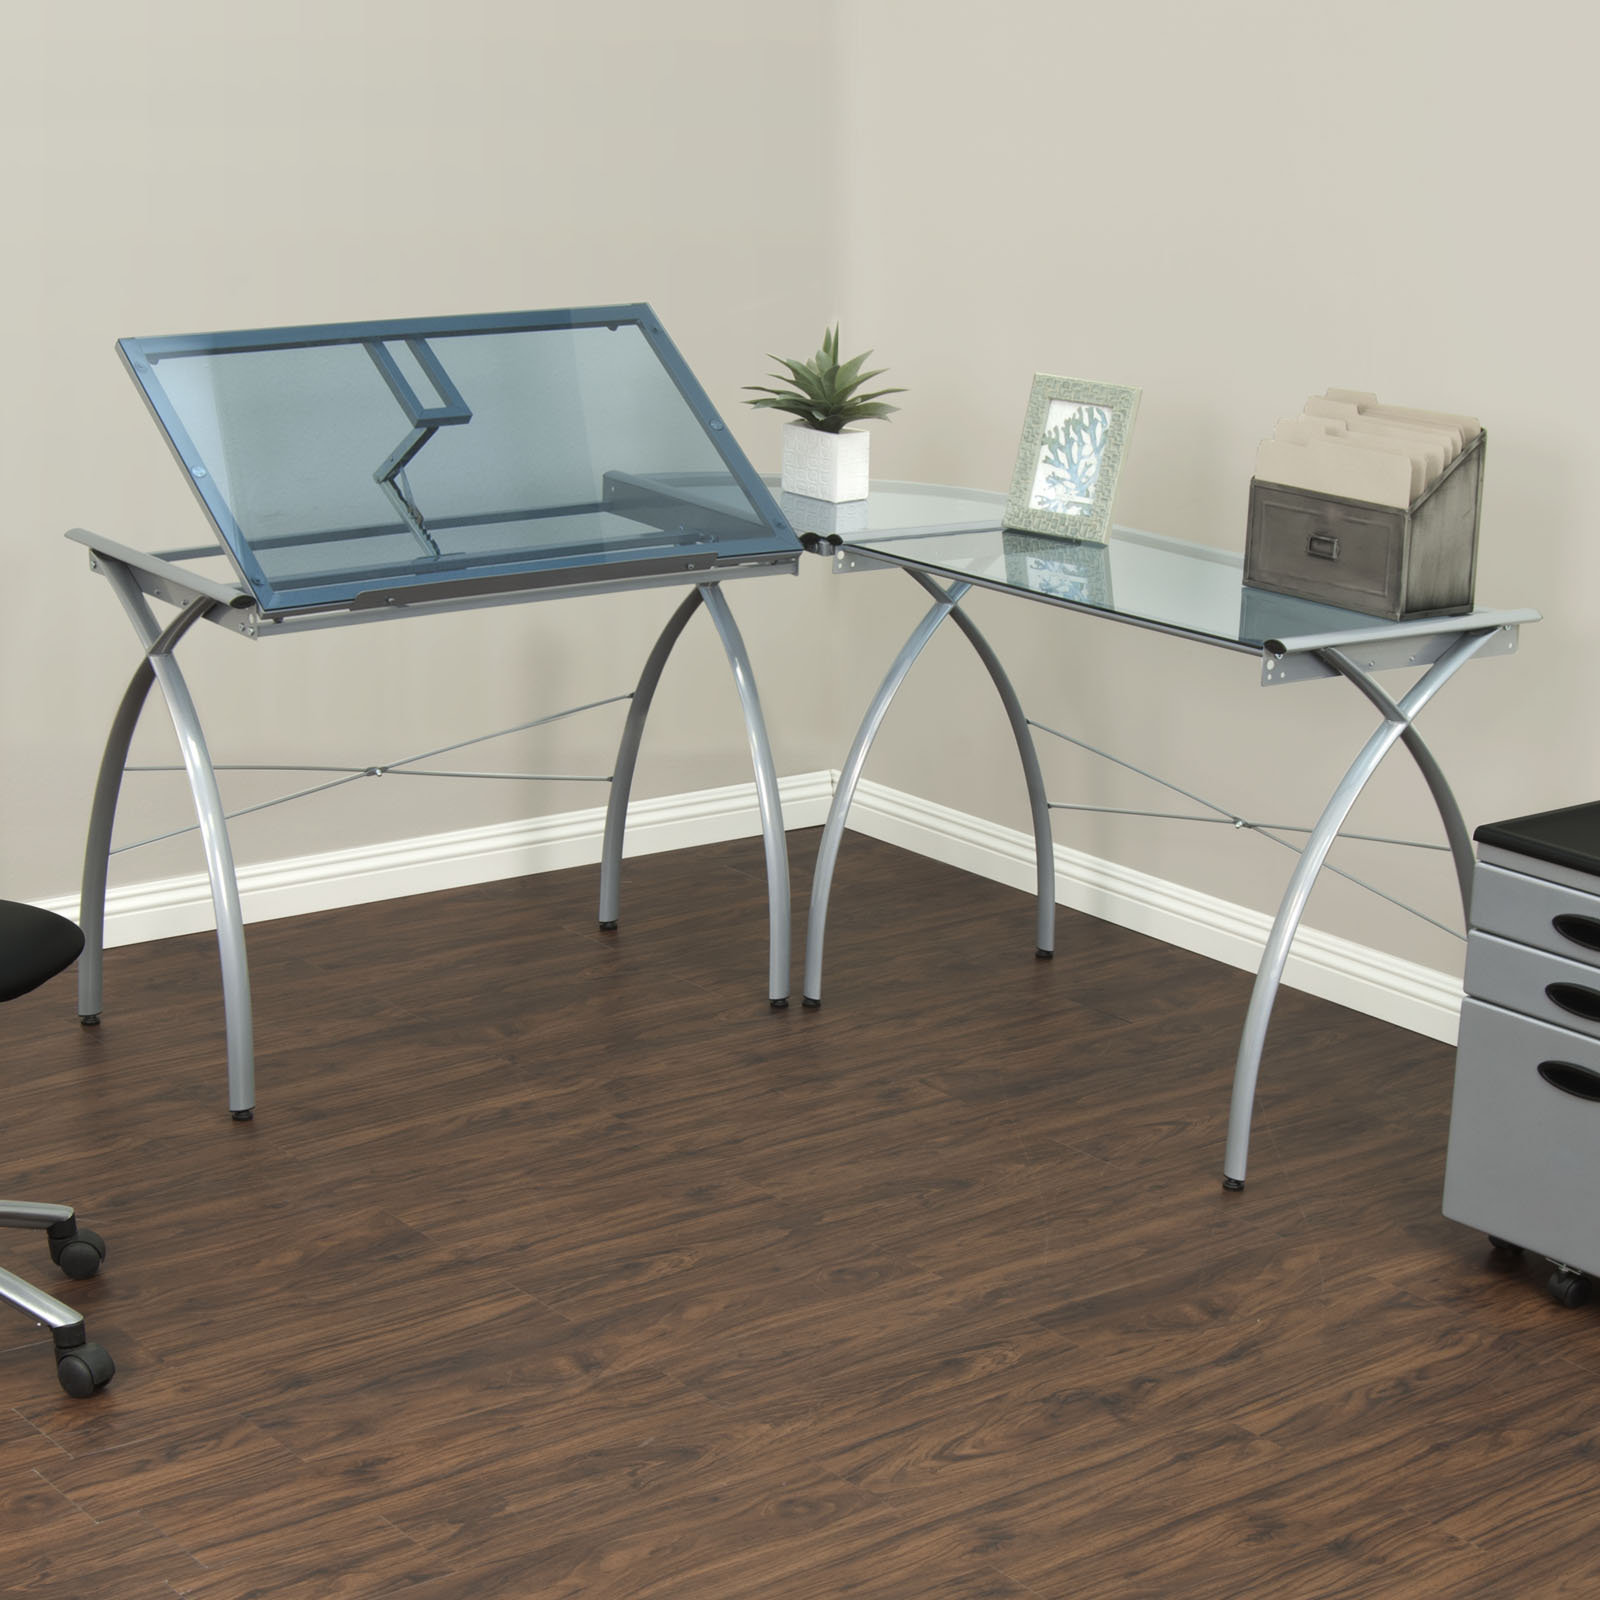 Futura L Shaped Workcenter With Tilting Top Drafting Desk In